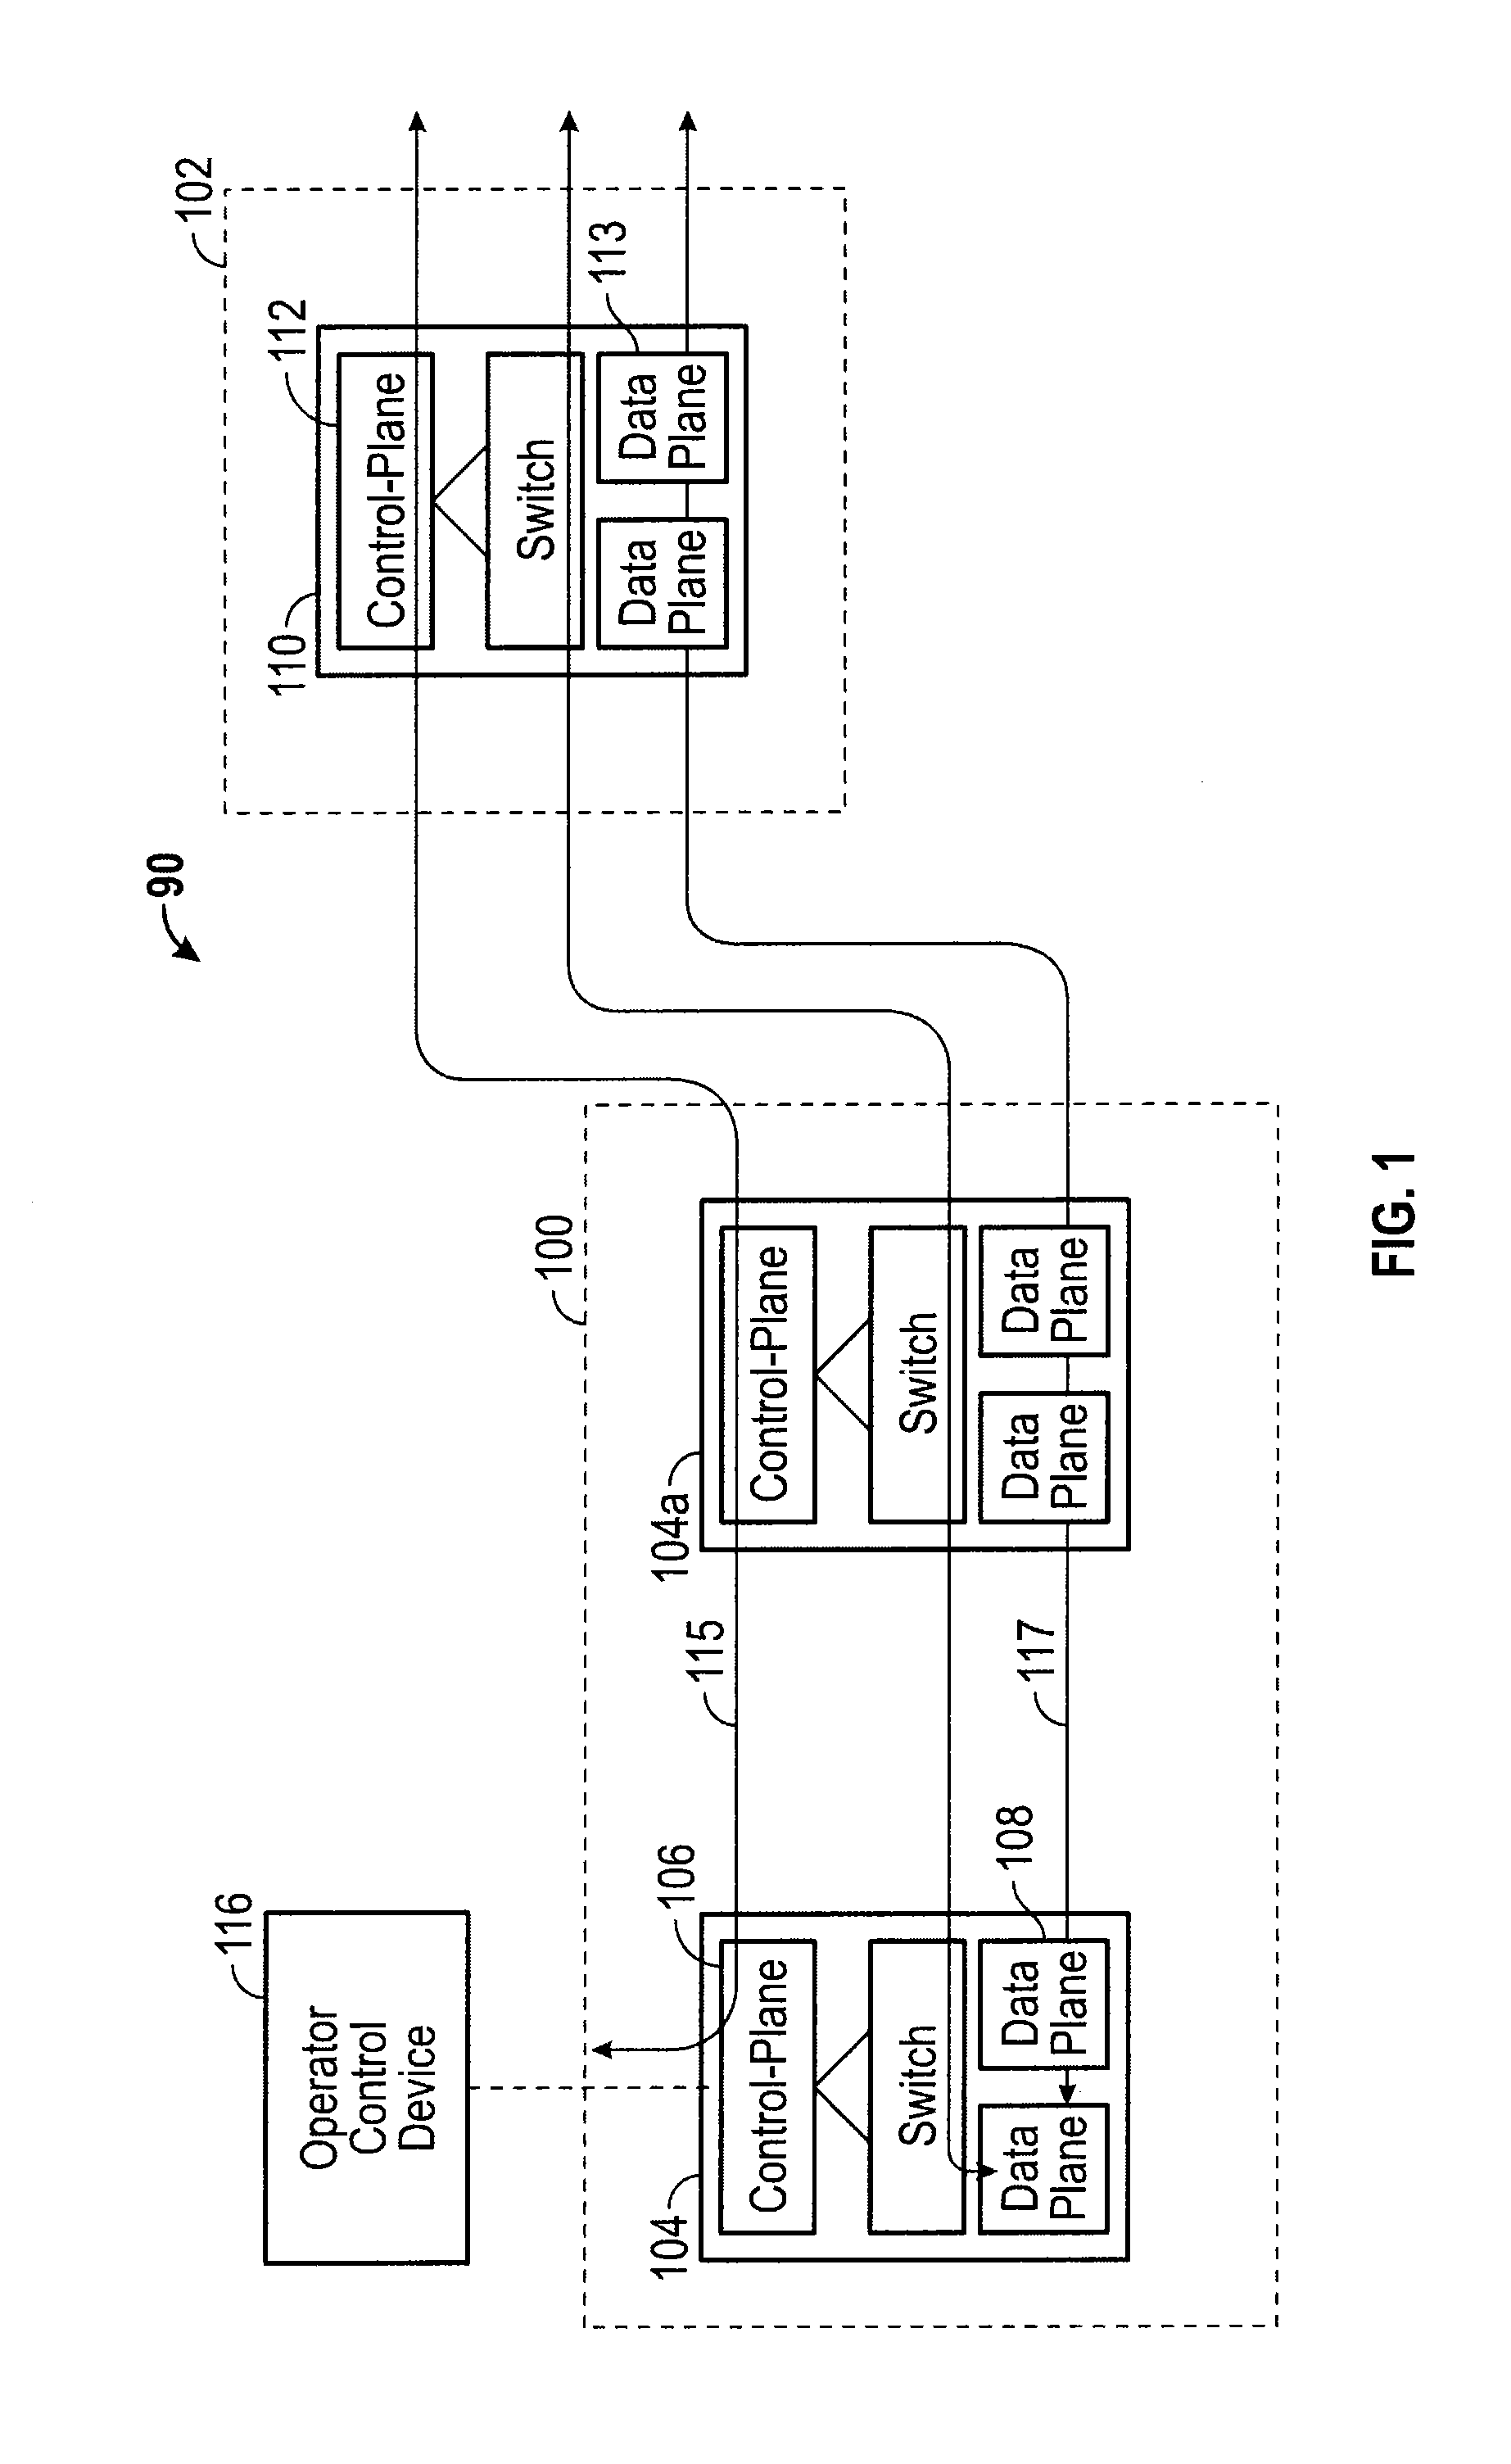 Method for Service Interface Encoding to Achieve Secure and Robust Network-to-Network Interface